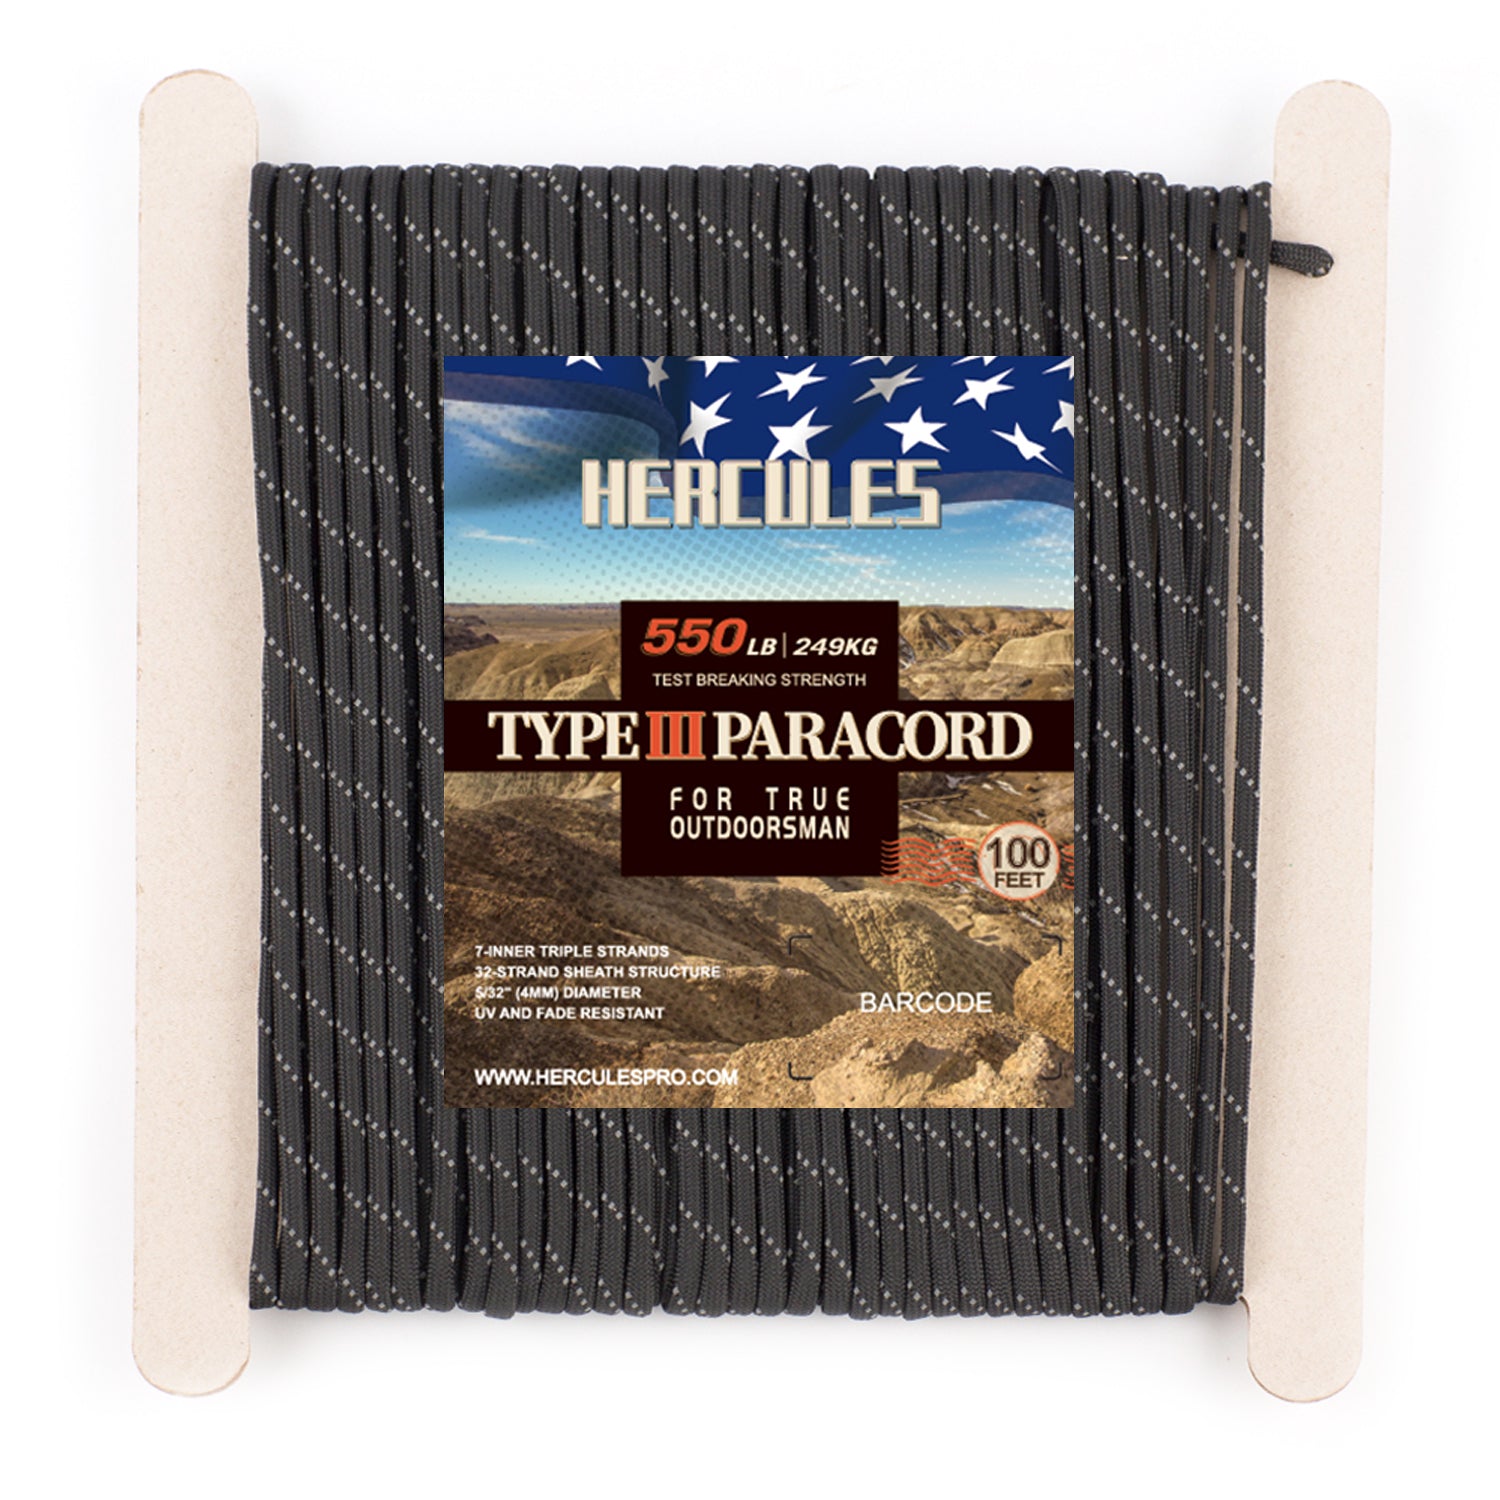 HERCULES Reflective 550 Paracord Black for Camping Rope Type III